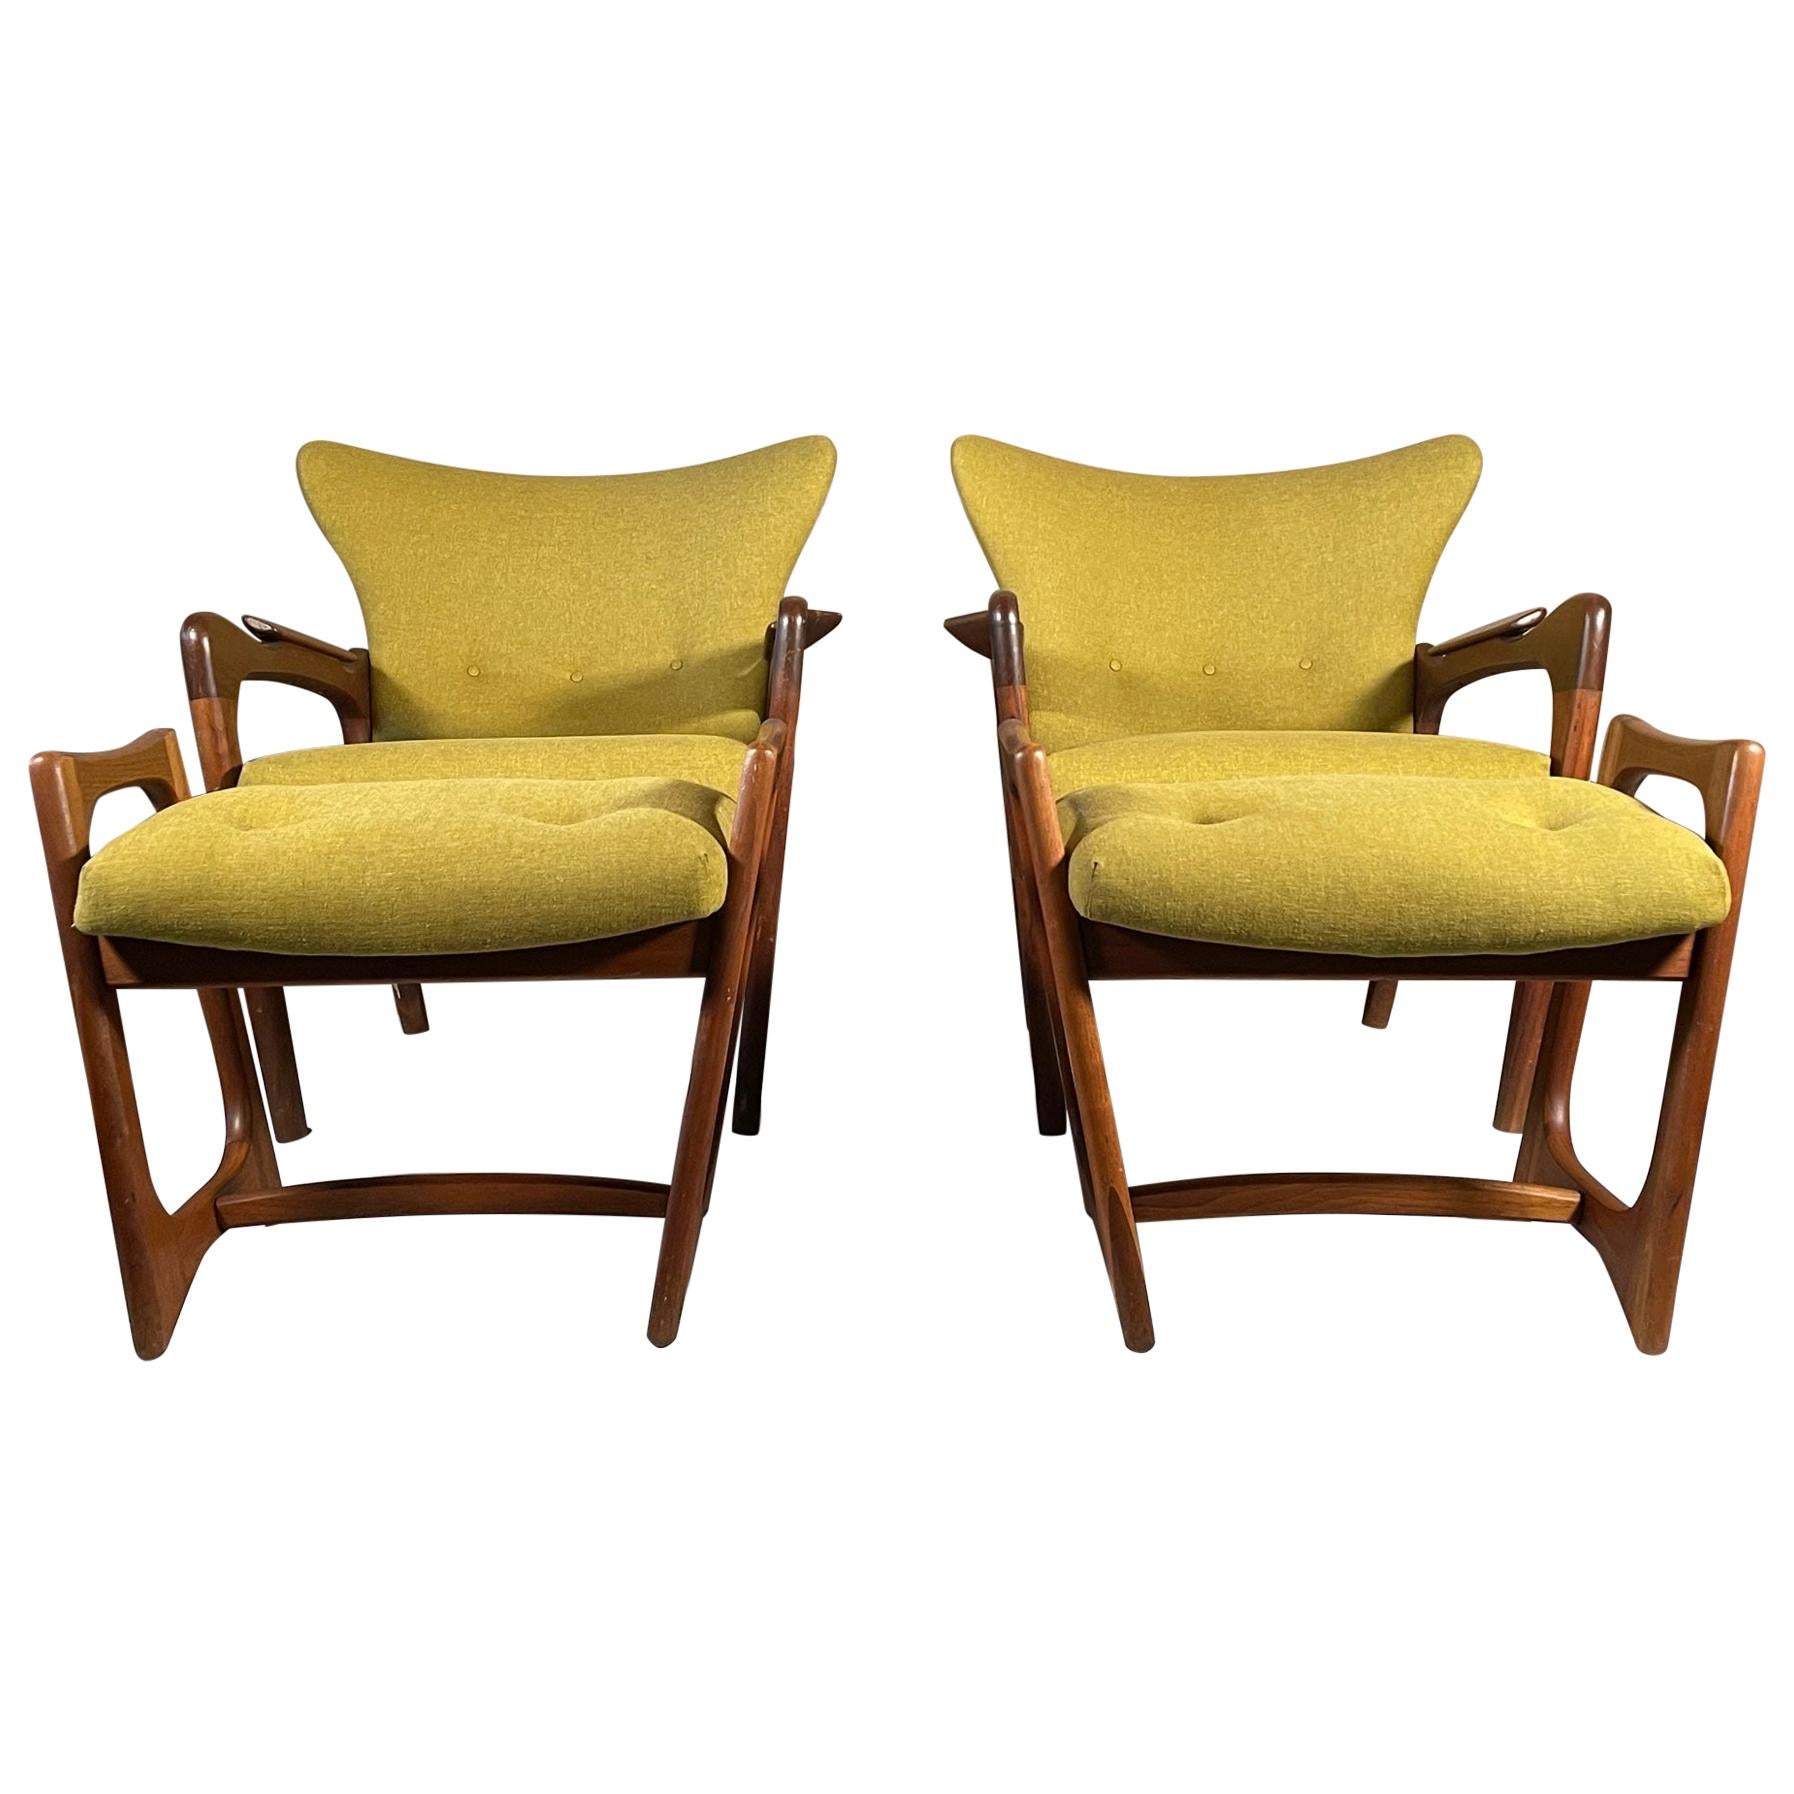 Unusual Adrian Pearsall Armchairs with Ottomans